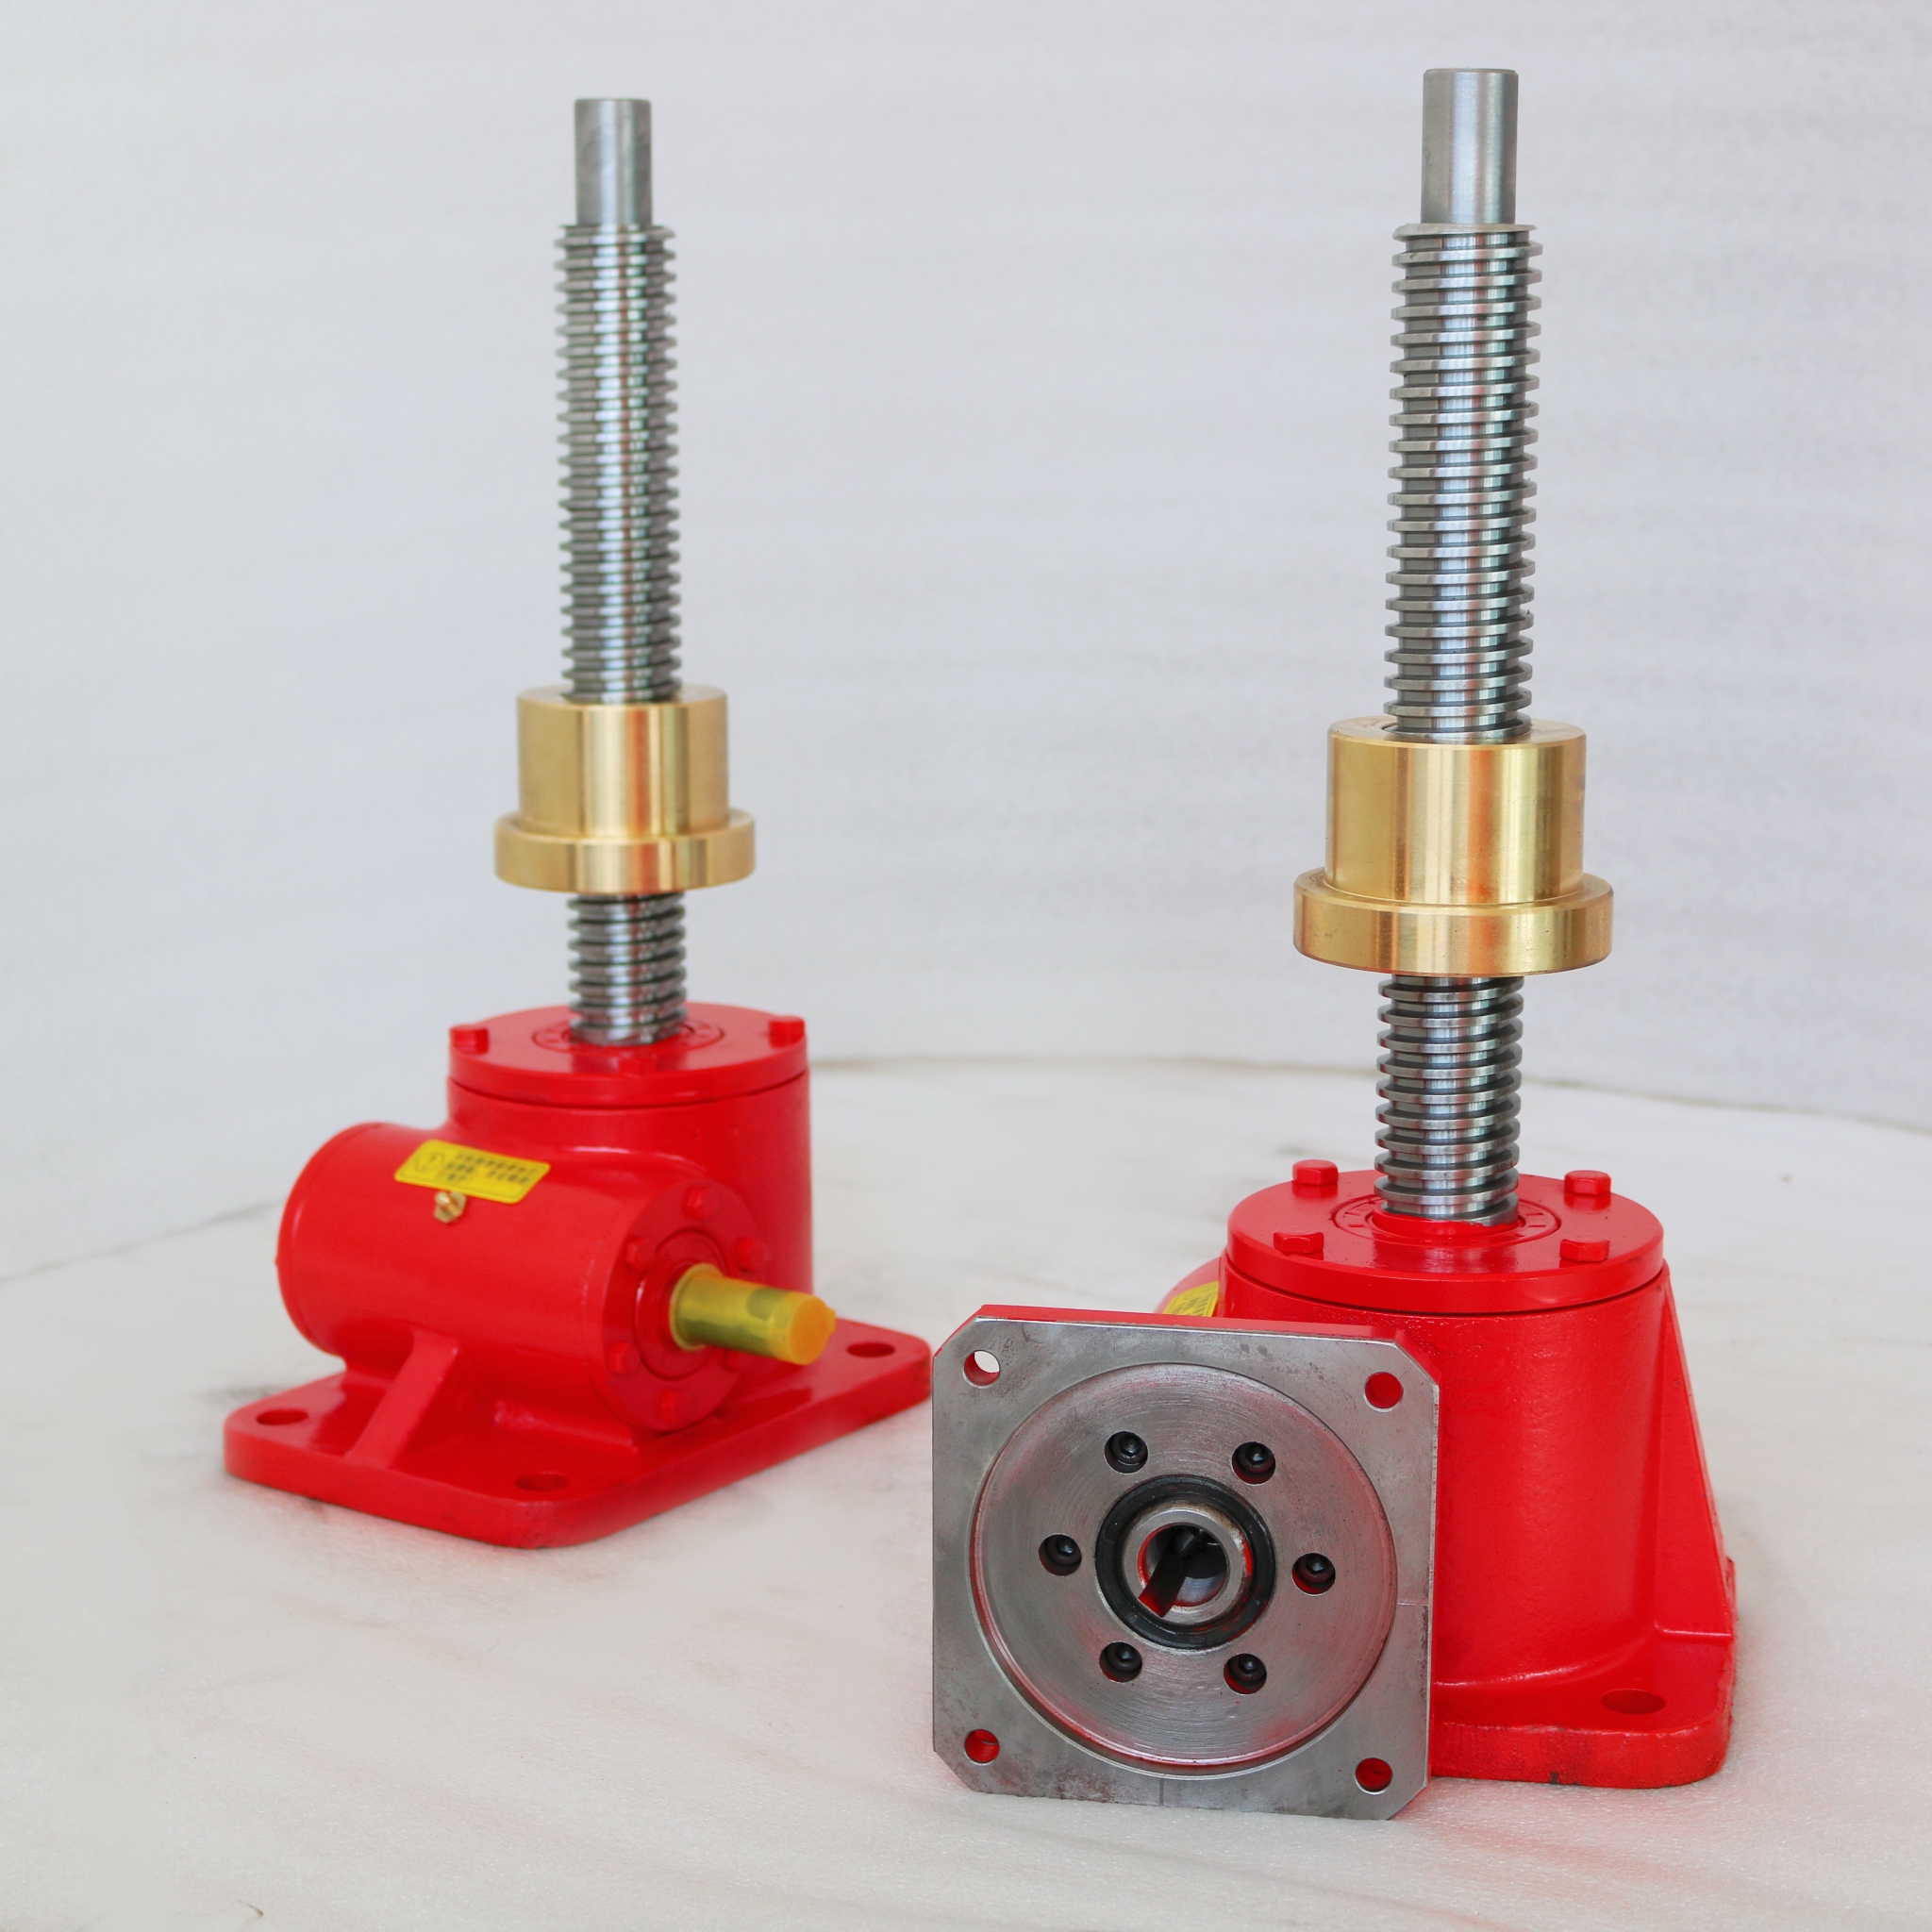 For SWL 5-ton screw jack, is the load equal to 5 tons?